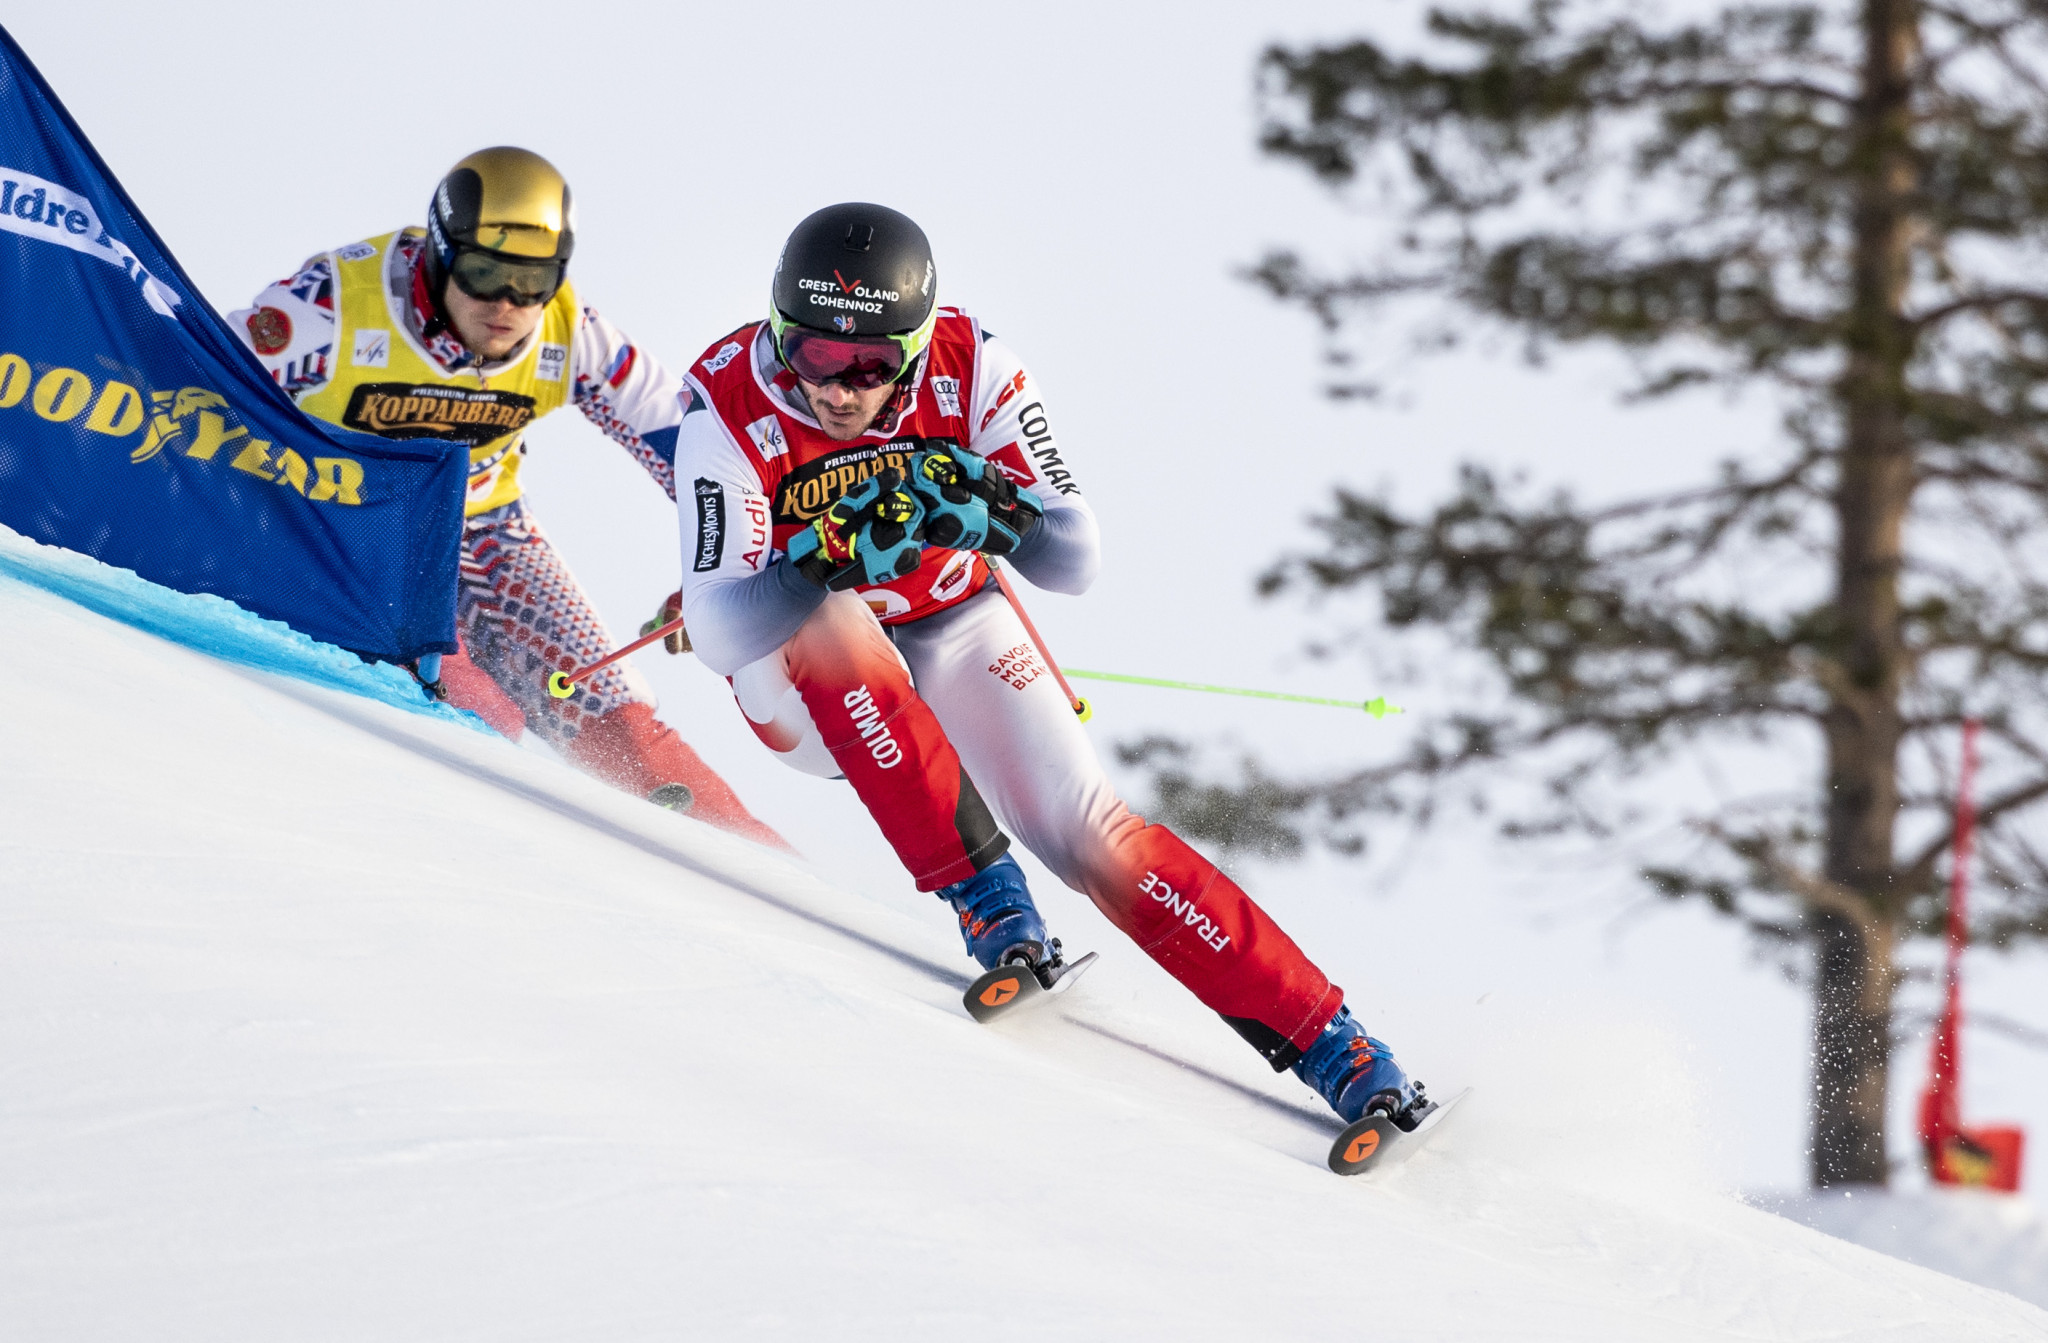 Idre Fjäll steps in to host FIS Cross World Championships next month